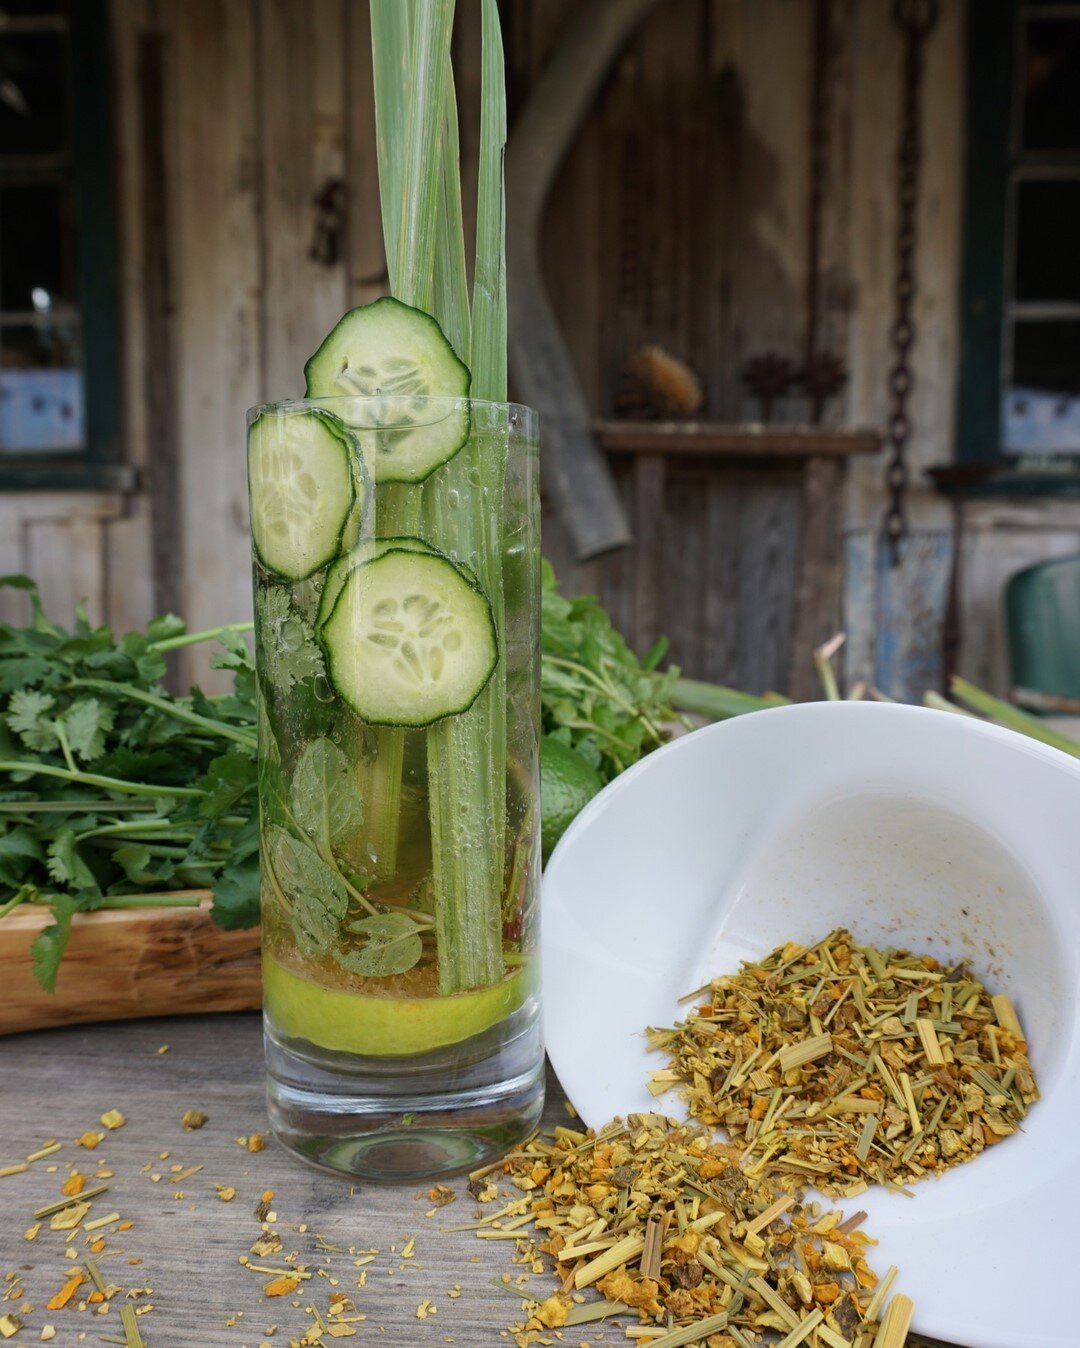 One of our featured cocktail creations for opening day of A Day in the Park last weekend was &quot;Spring Forward&quot; made with coriander infused vodka, lemongrass from our garden, cucumber, mint, lime and a turmeric/ginger tincture. Get a taste of